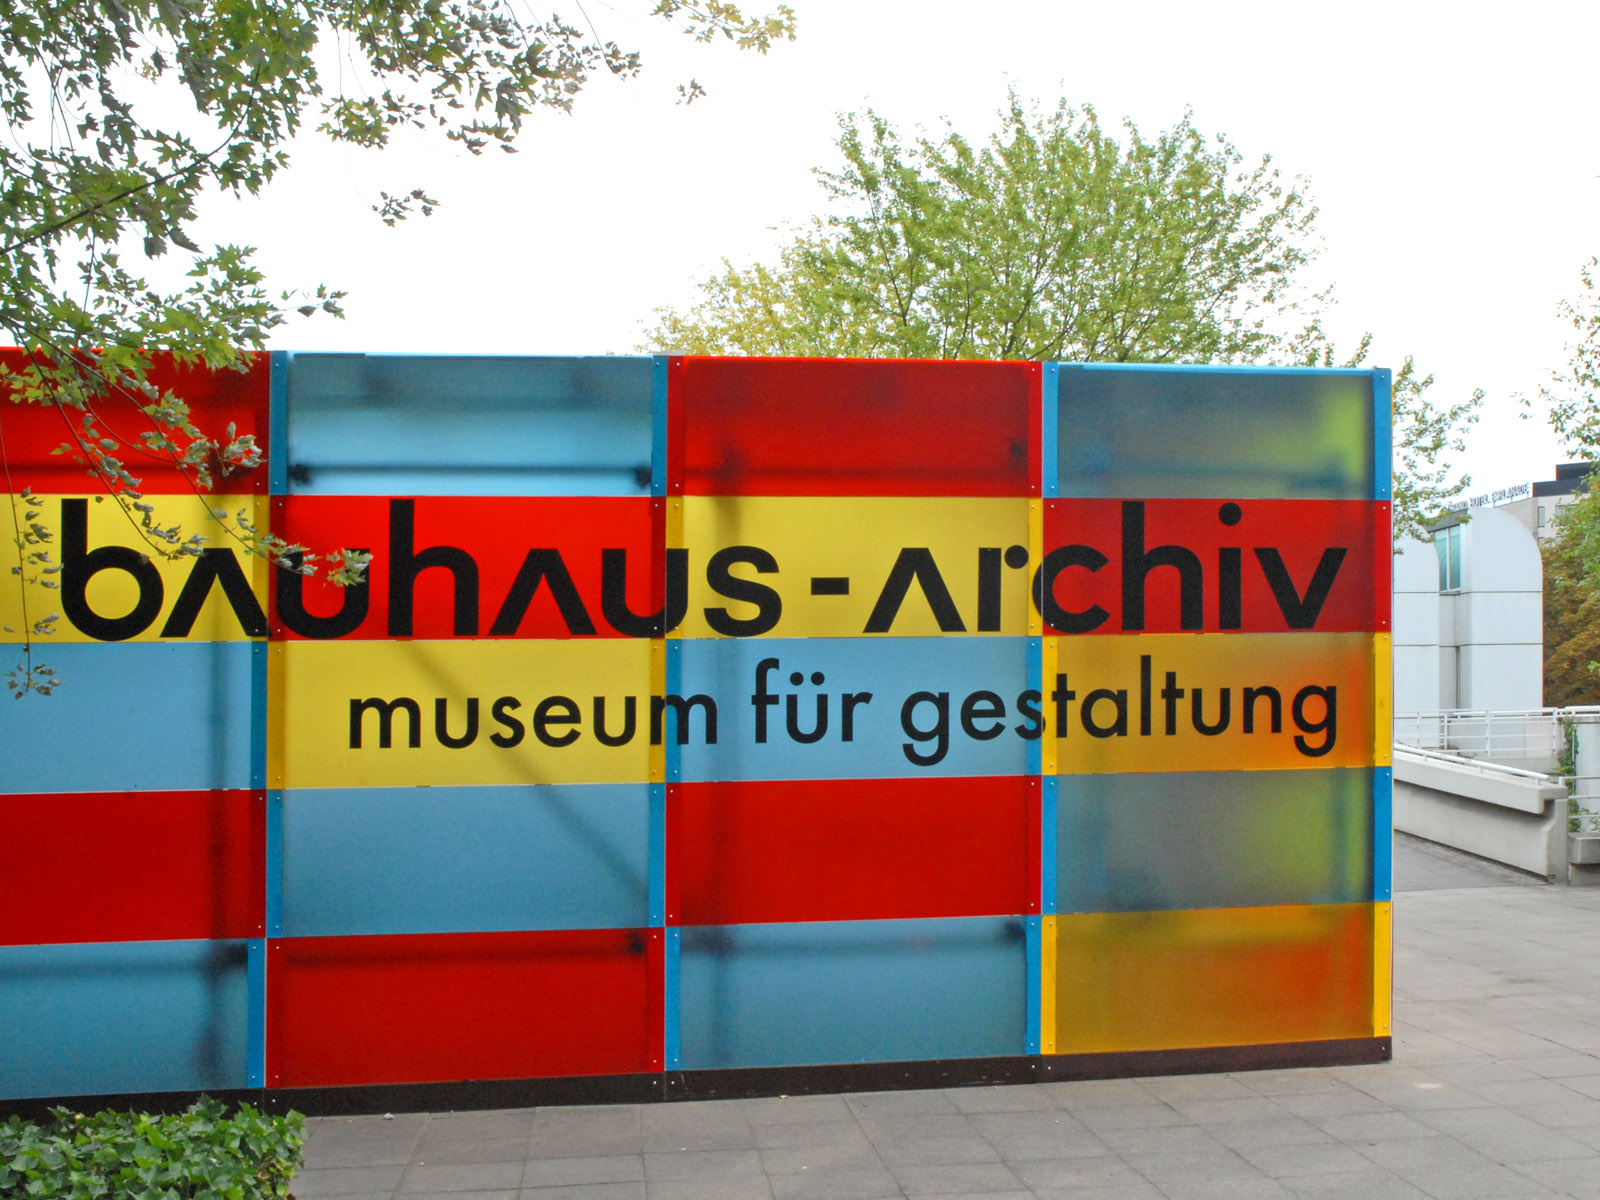 The Bauhaus Archive in Berlin